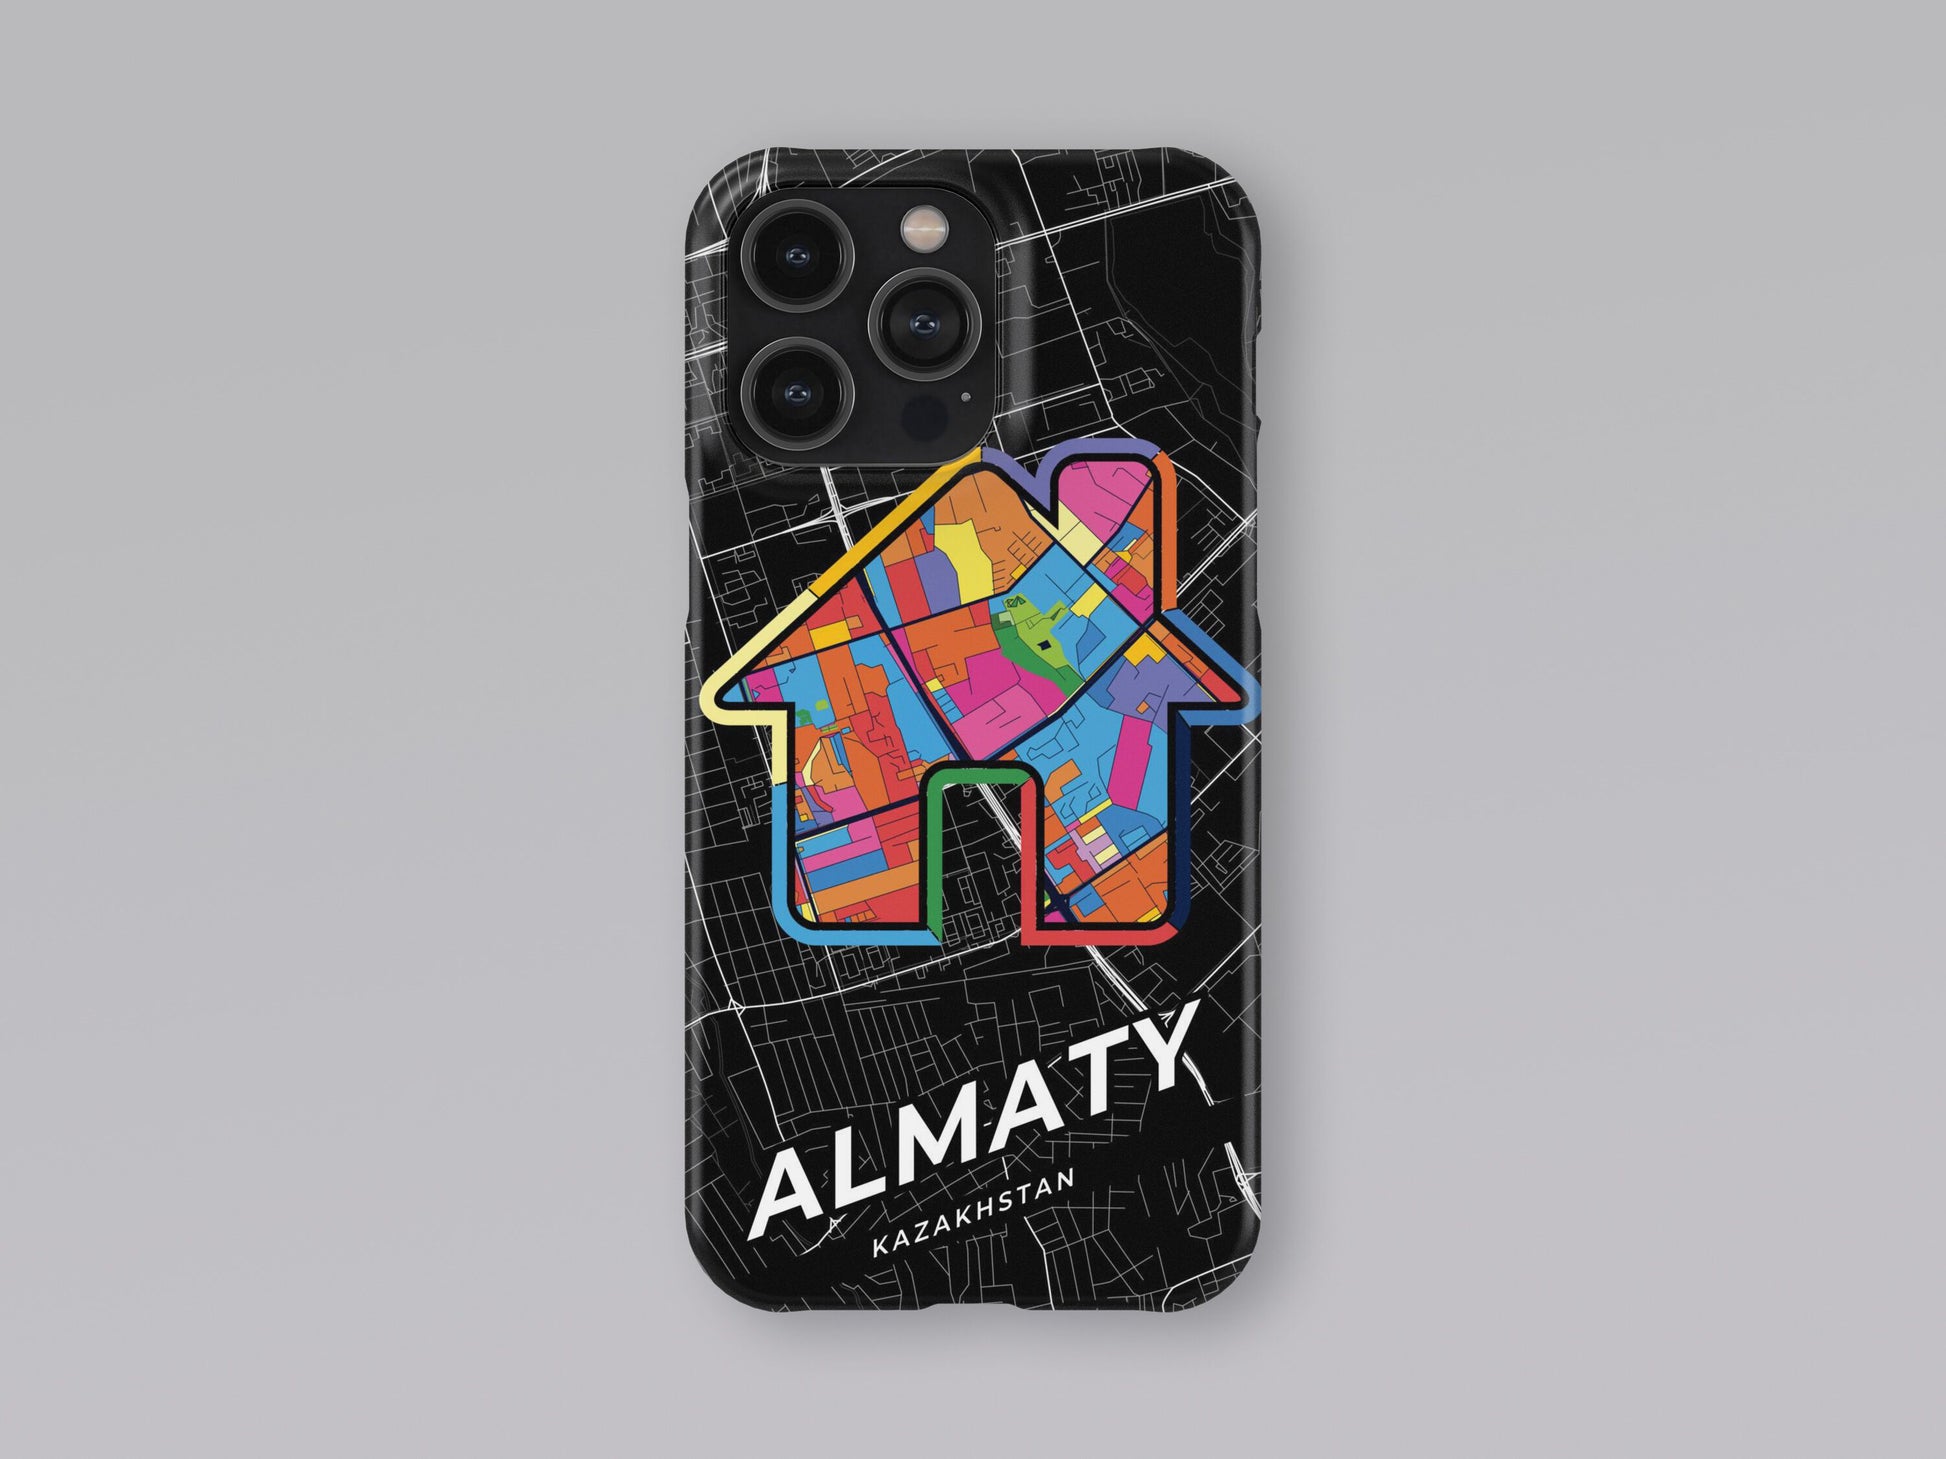 Almaty Kazakhstan slim phone case with colorful icon. Birthday, wedding or housewarming gift. Couple match cases. 3